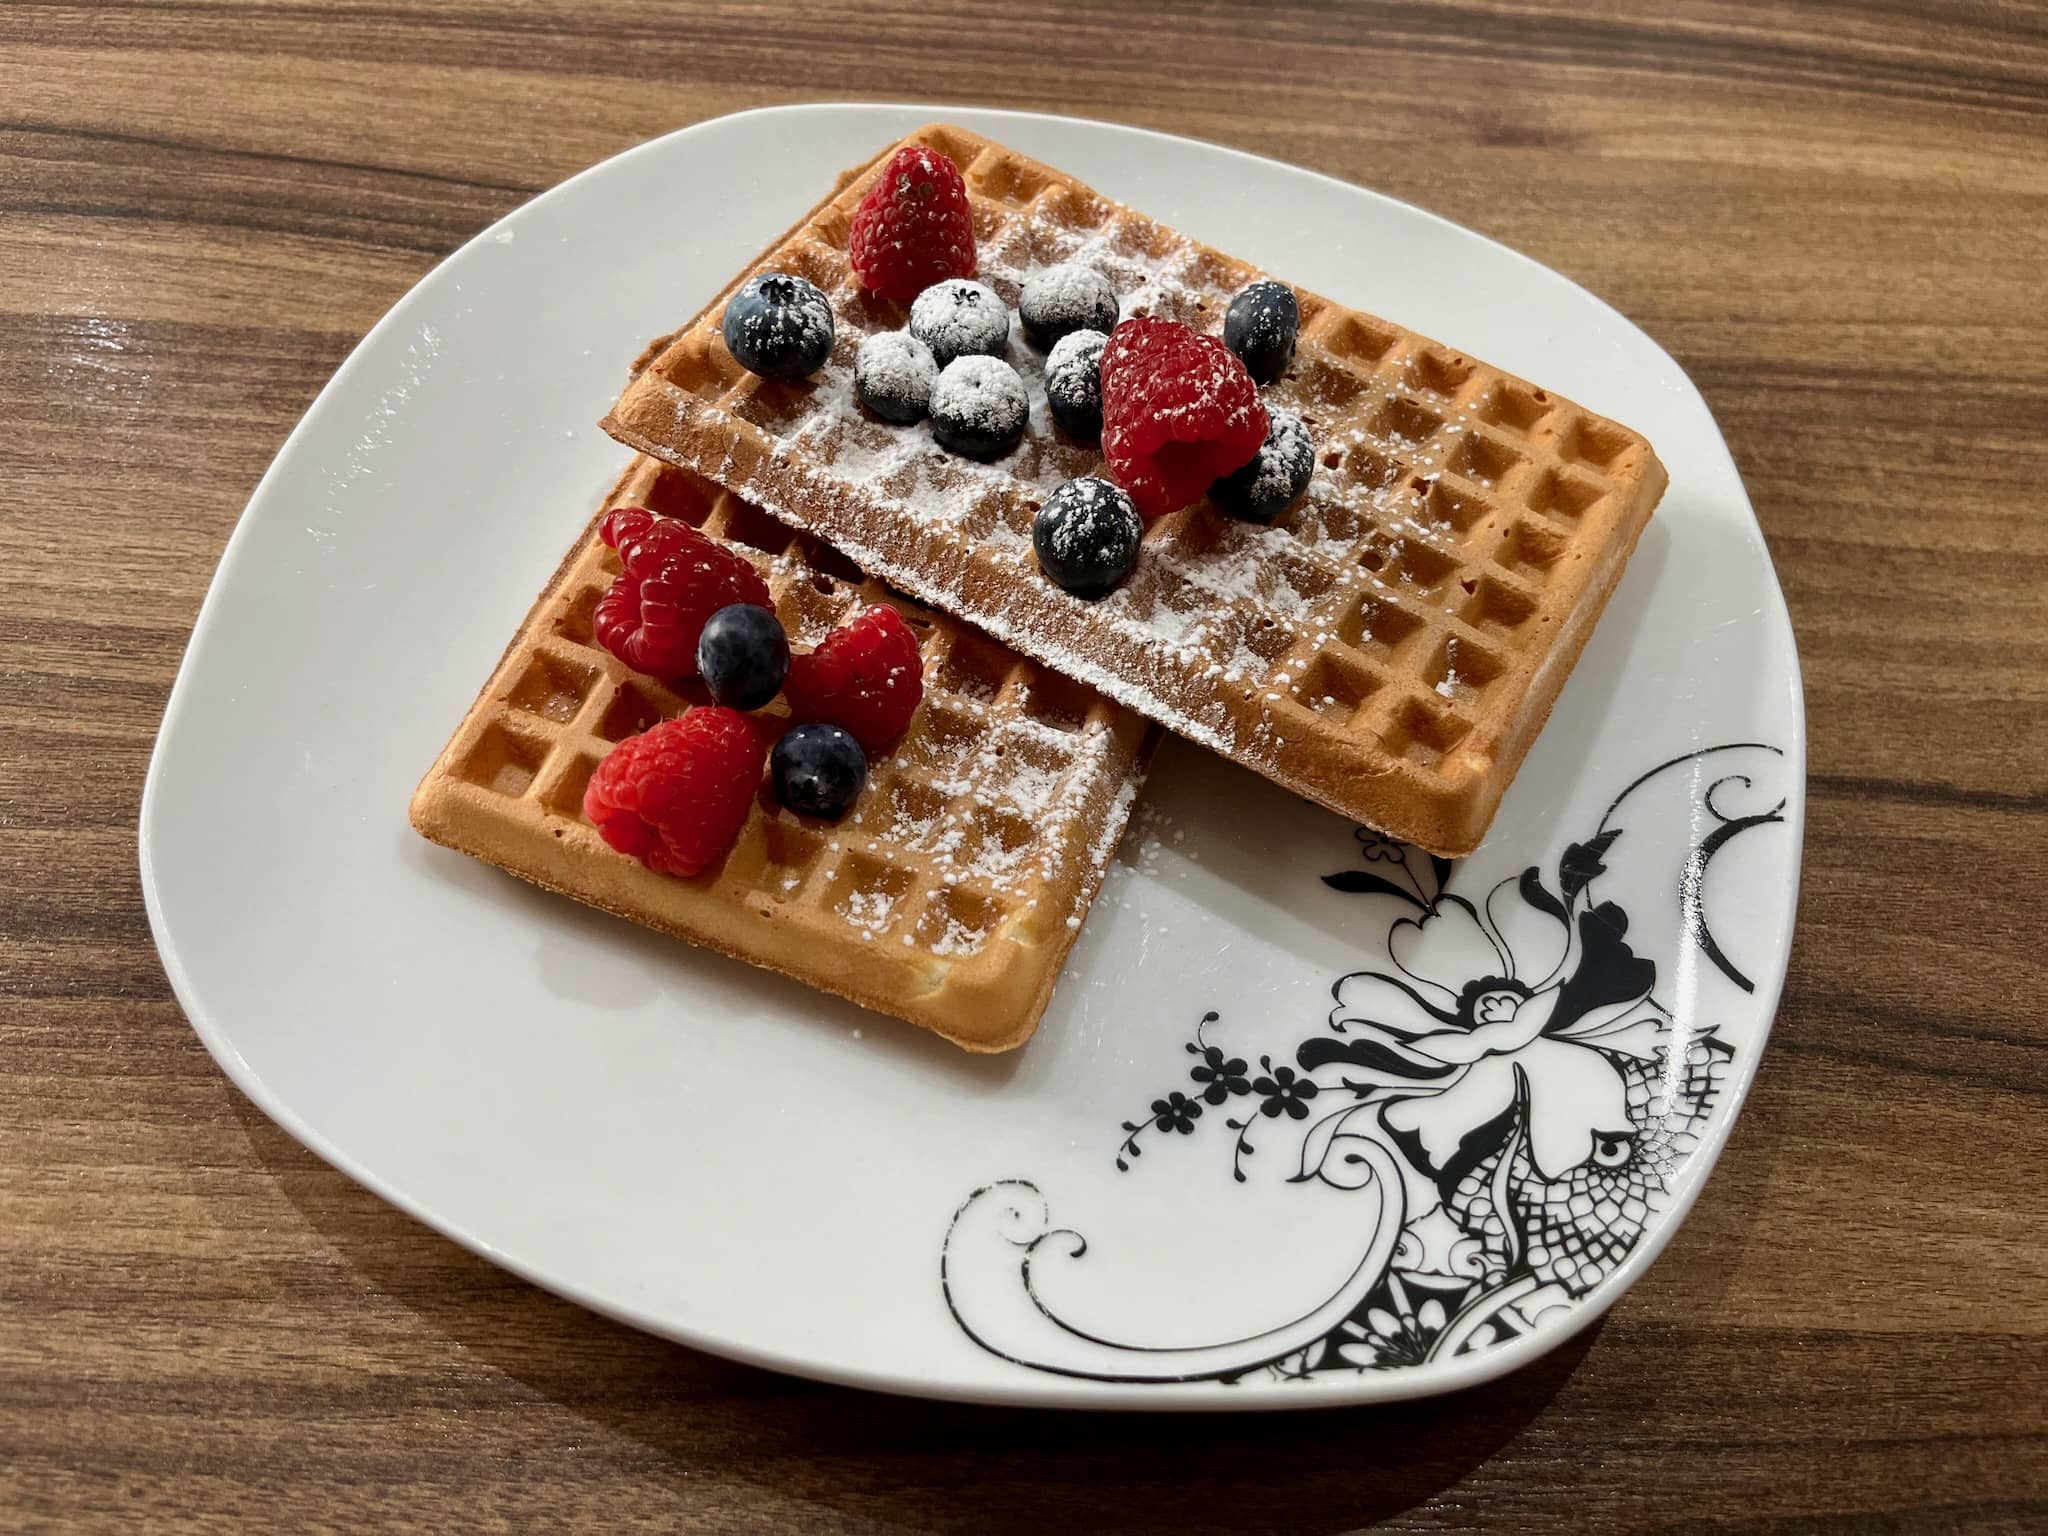 Two waffles on a plate decorated with icing sugar and some blueberries and raspberries